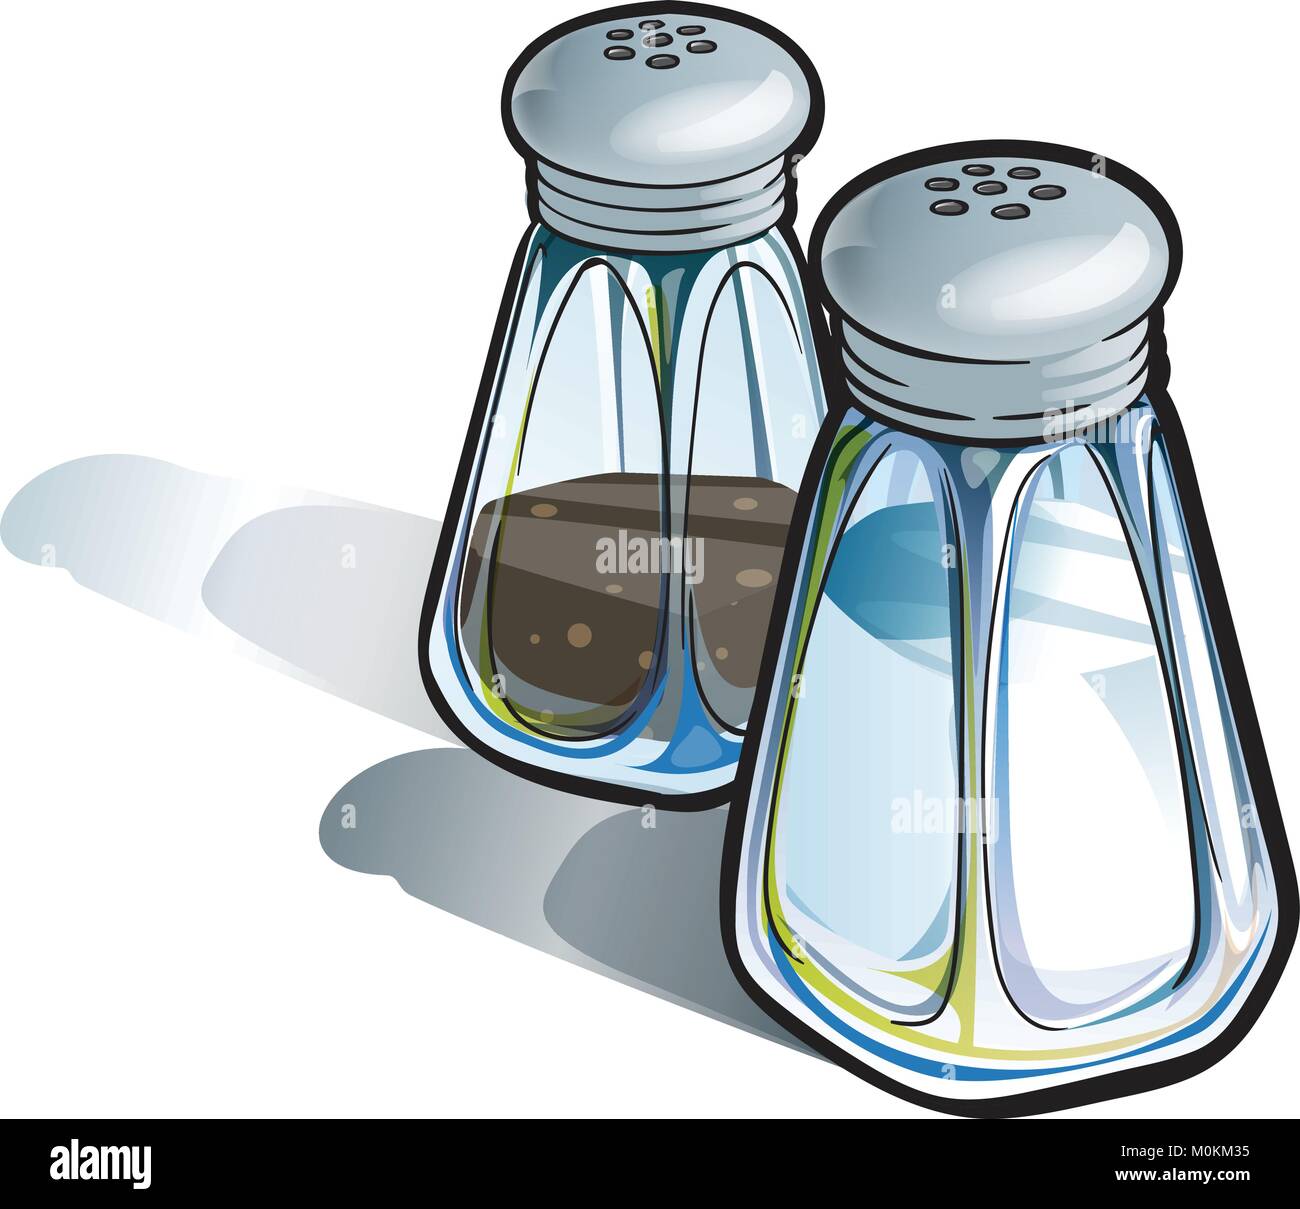 https://c8.alamy.com/comp/M0KM35/a-illustration-of-a-set-of-salt-and-pepper-shakers-this-is-a-scalable-M0KM35.jpg